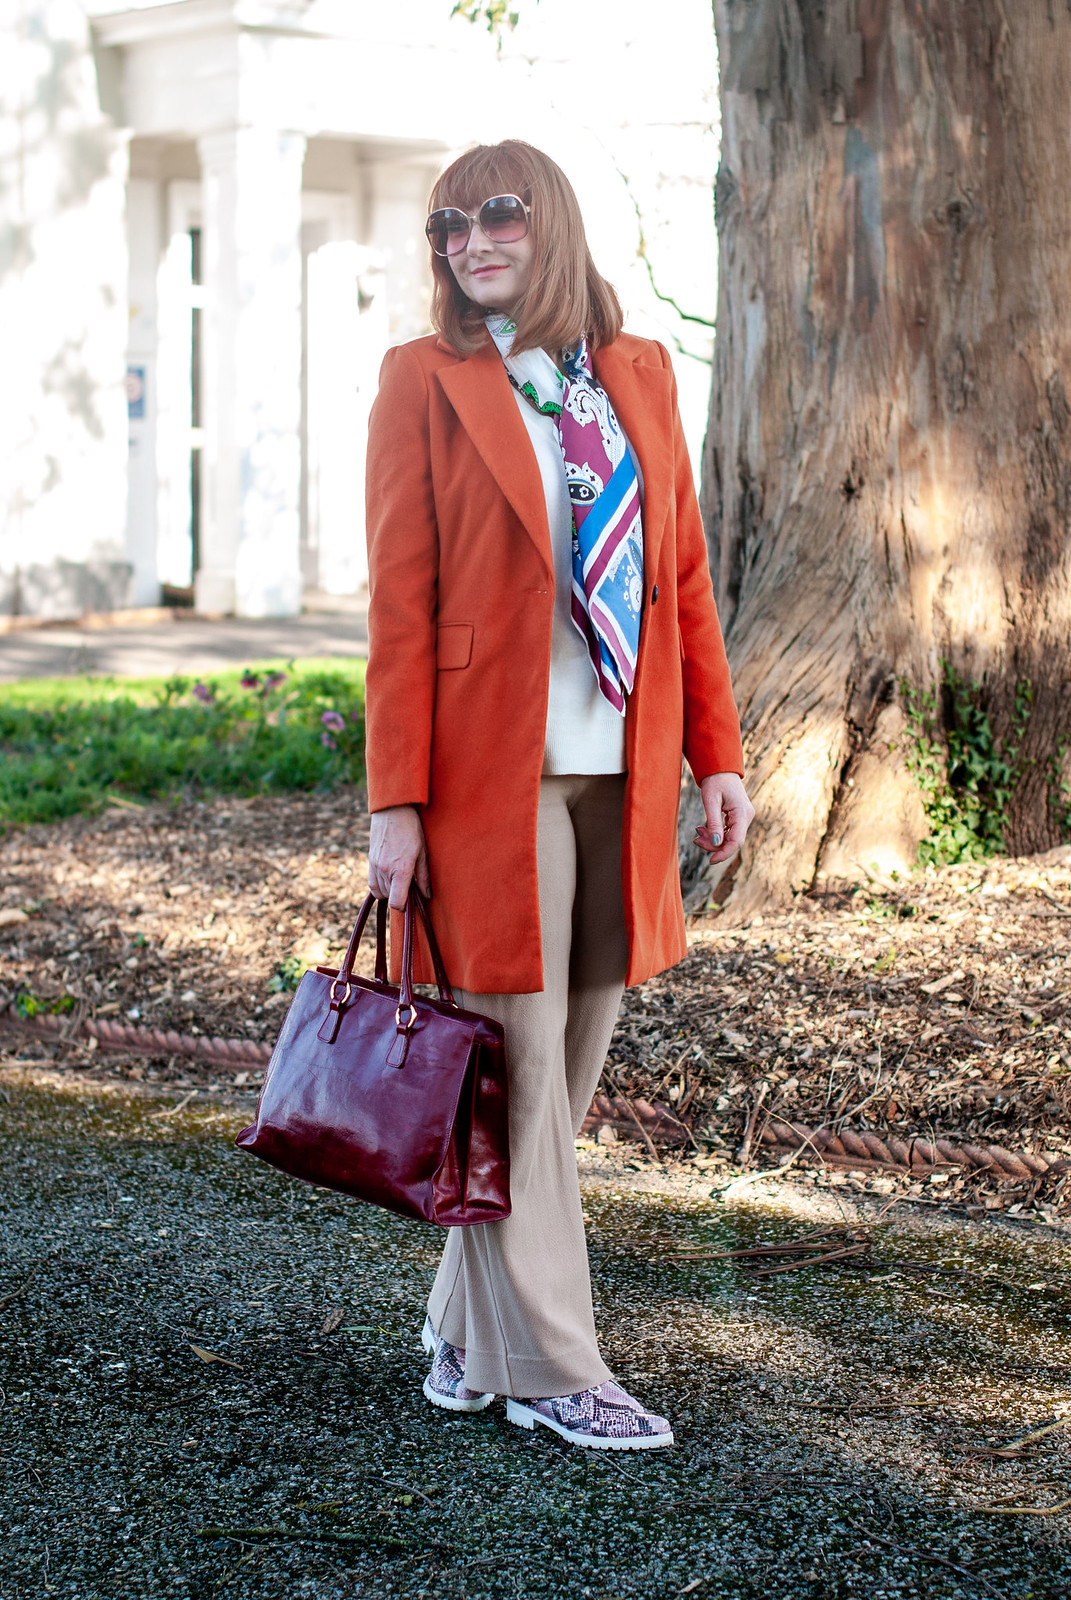 Fashion Over 40: A Longline Coat or Blazer is Your Wardrobe's Best Friend \ longline orange coat \ camel wide leg trousers \ red leather tote bag \ pink snakeskin lace up shoes | Not Dressed As Lamb